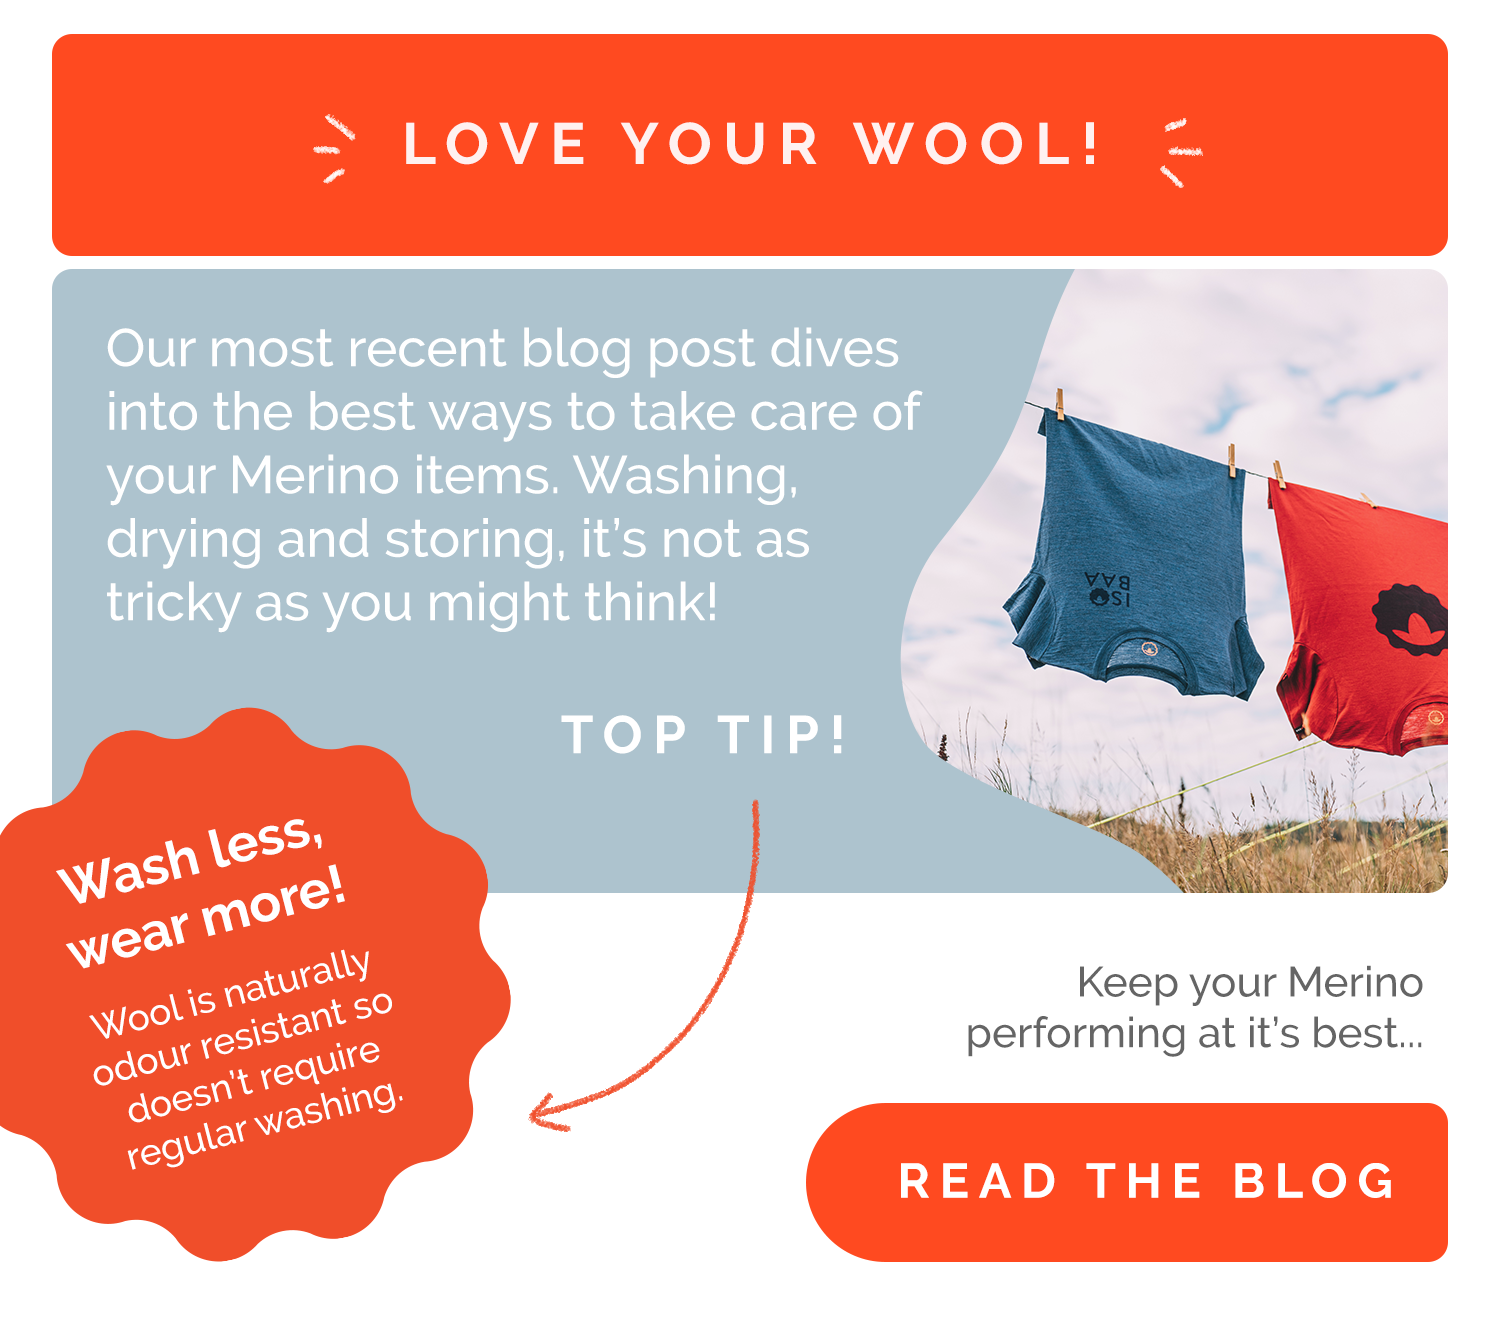 Love your Wool